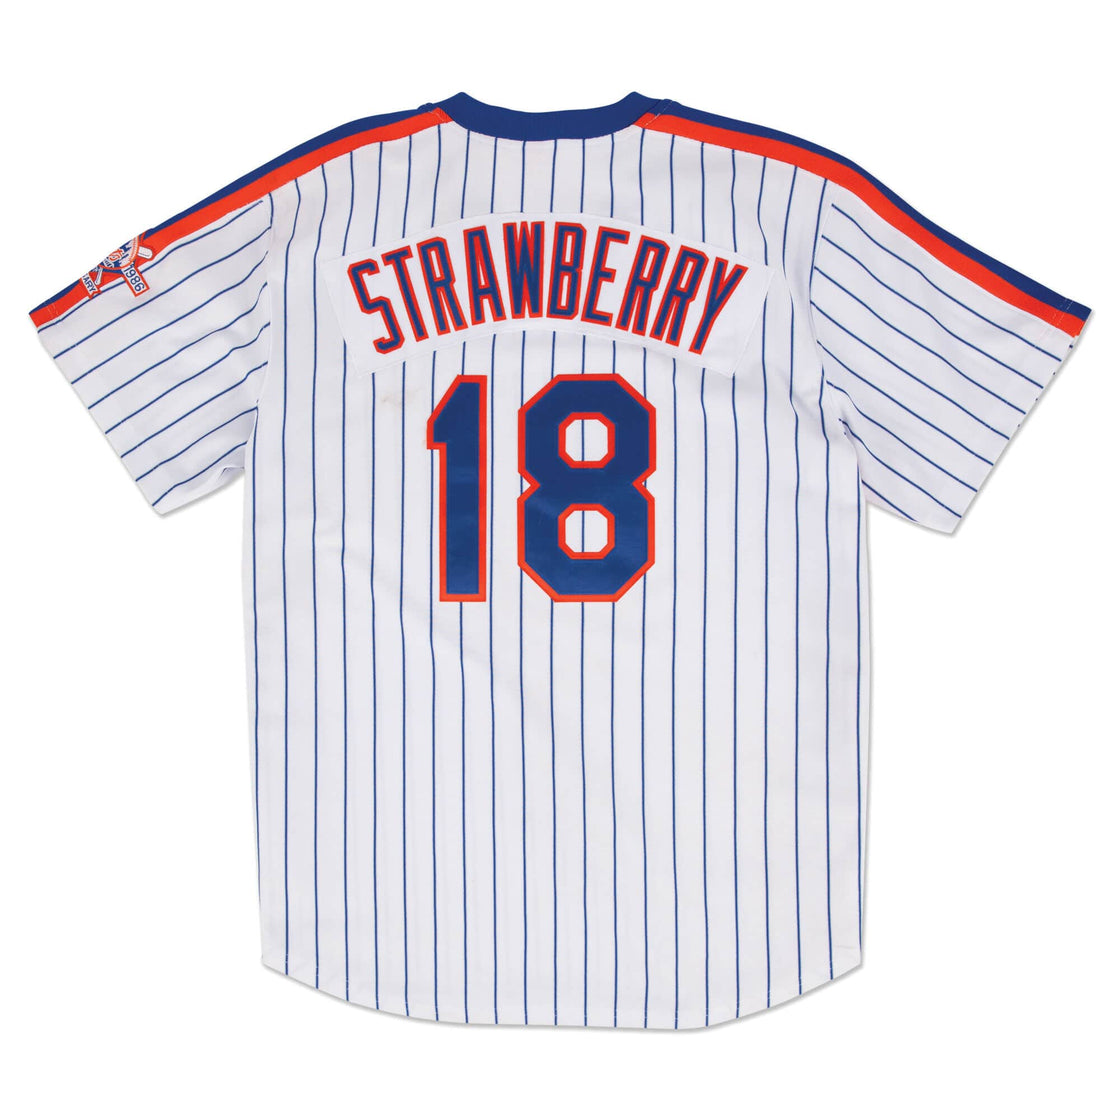 Authentic Jersey New York Mets Home 1986 Darryl Strawberry